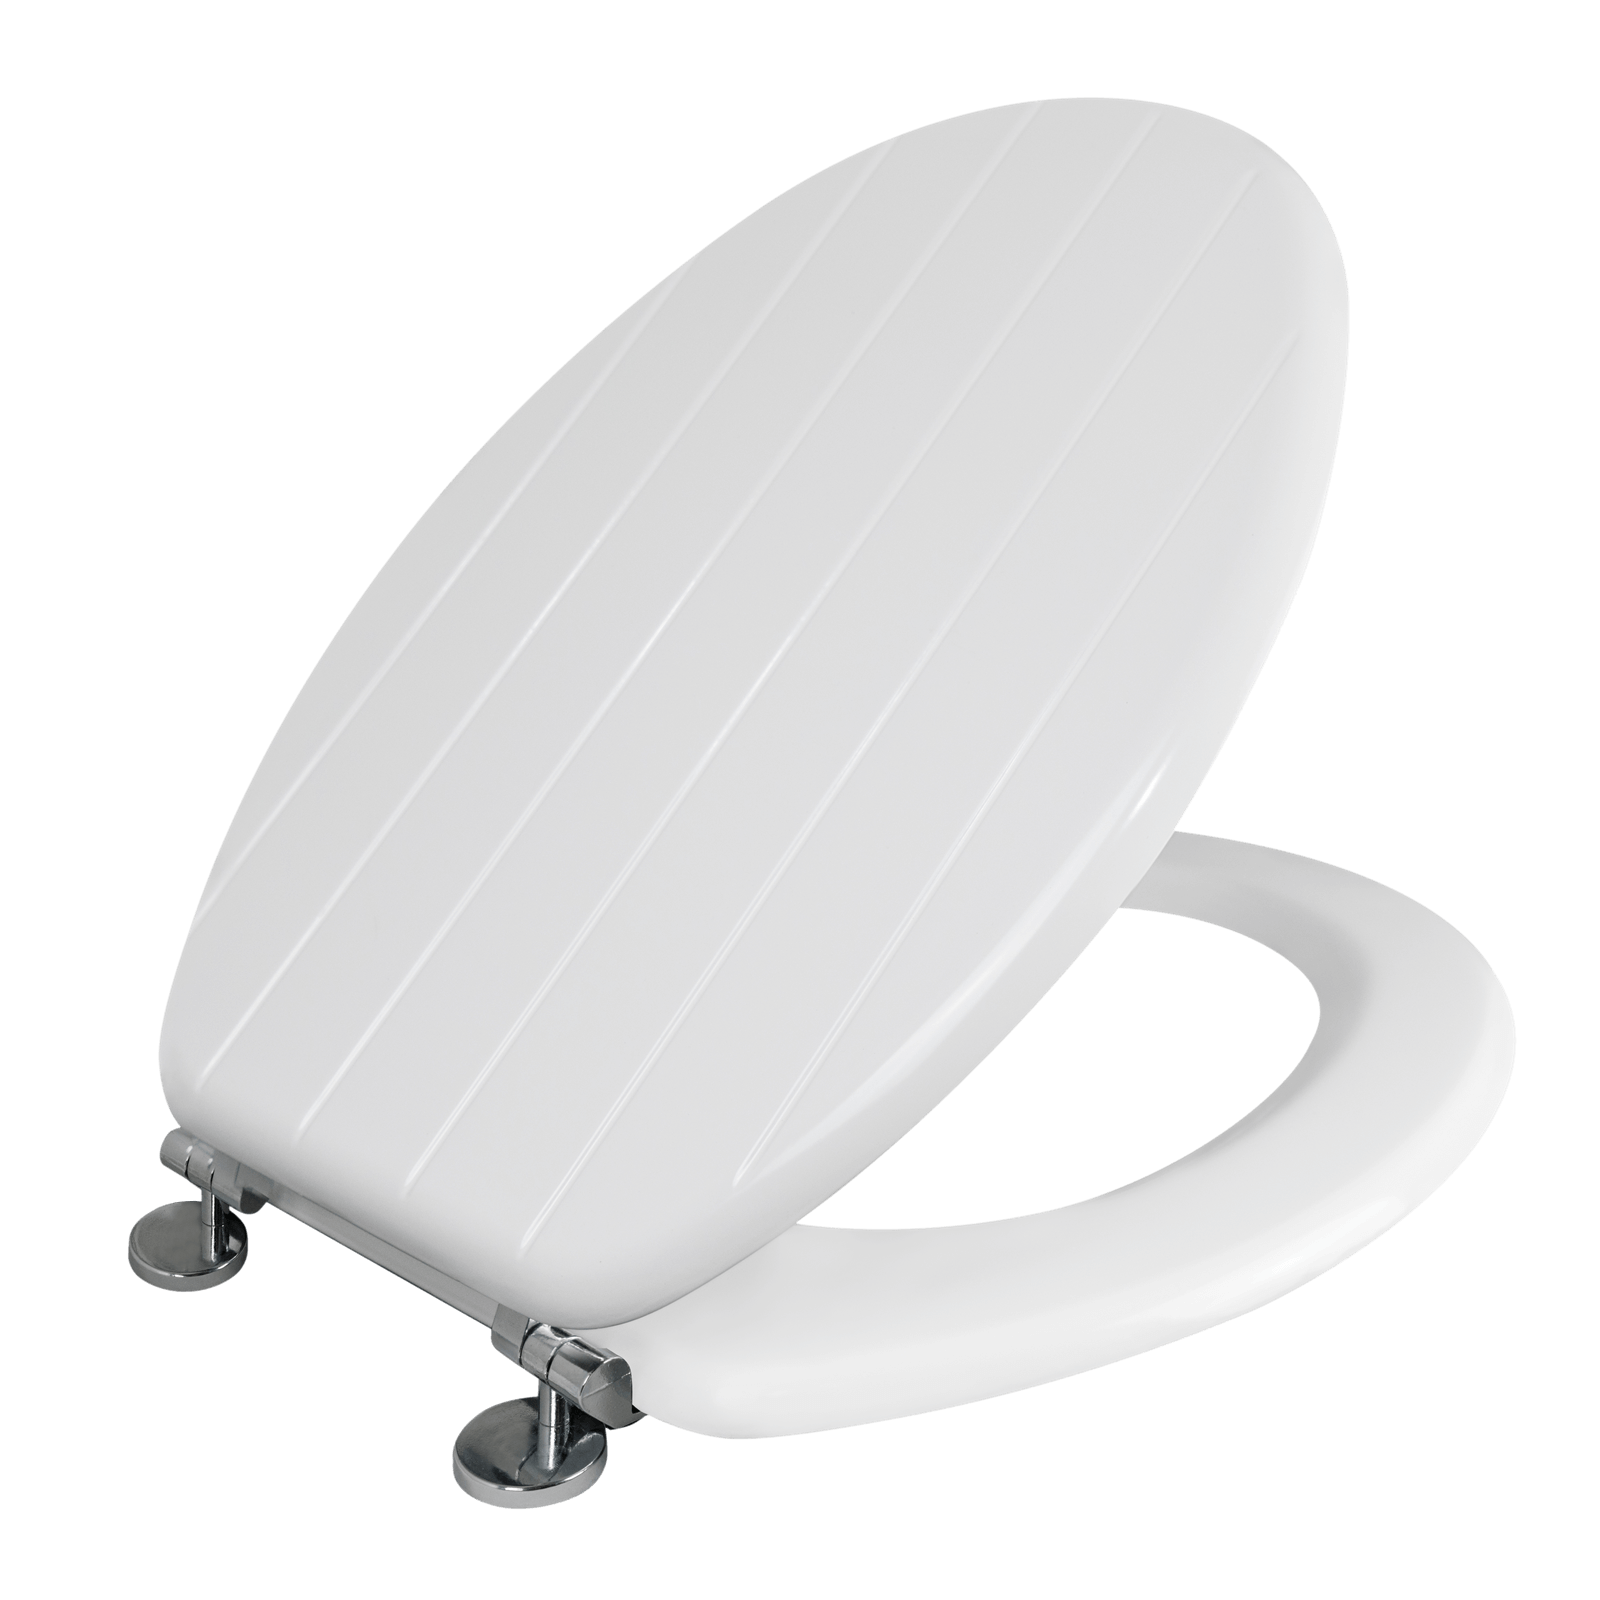 Allana Tongue & Groove Moulded Wood Toilet Seat - White